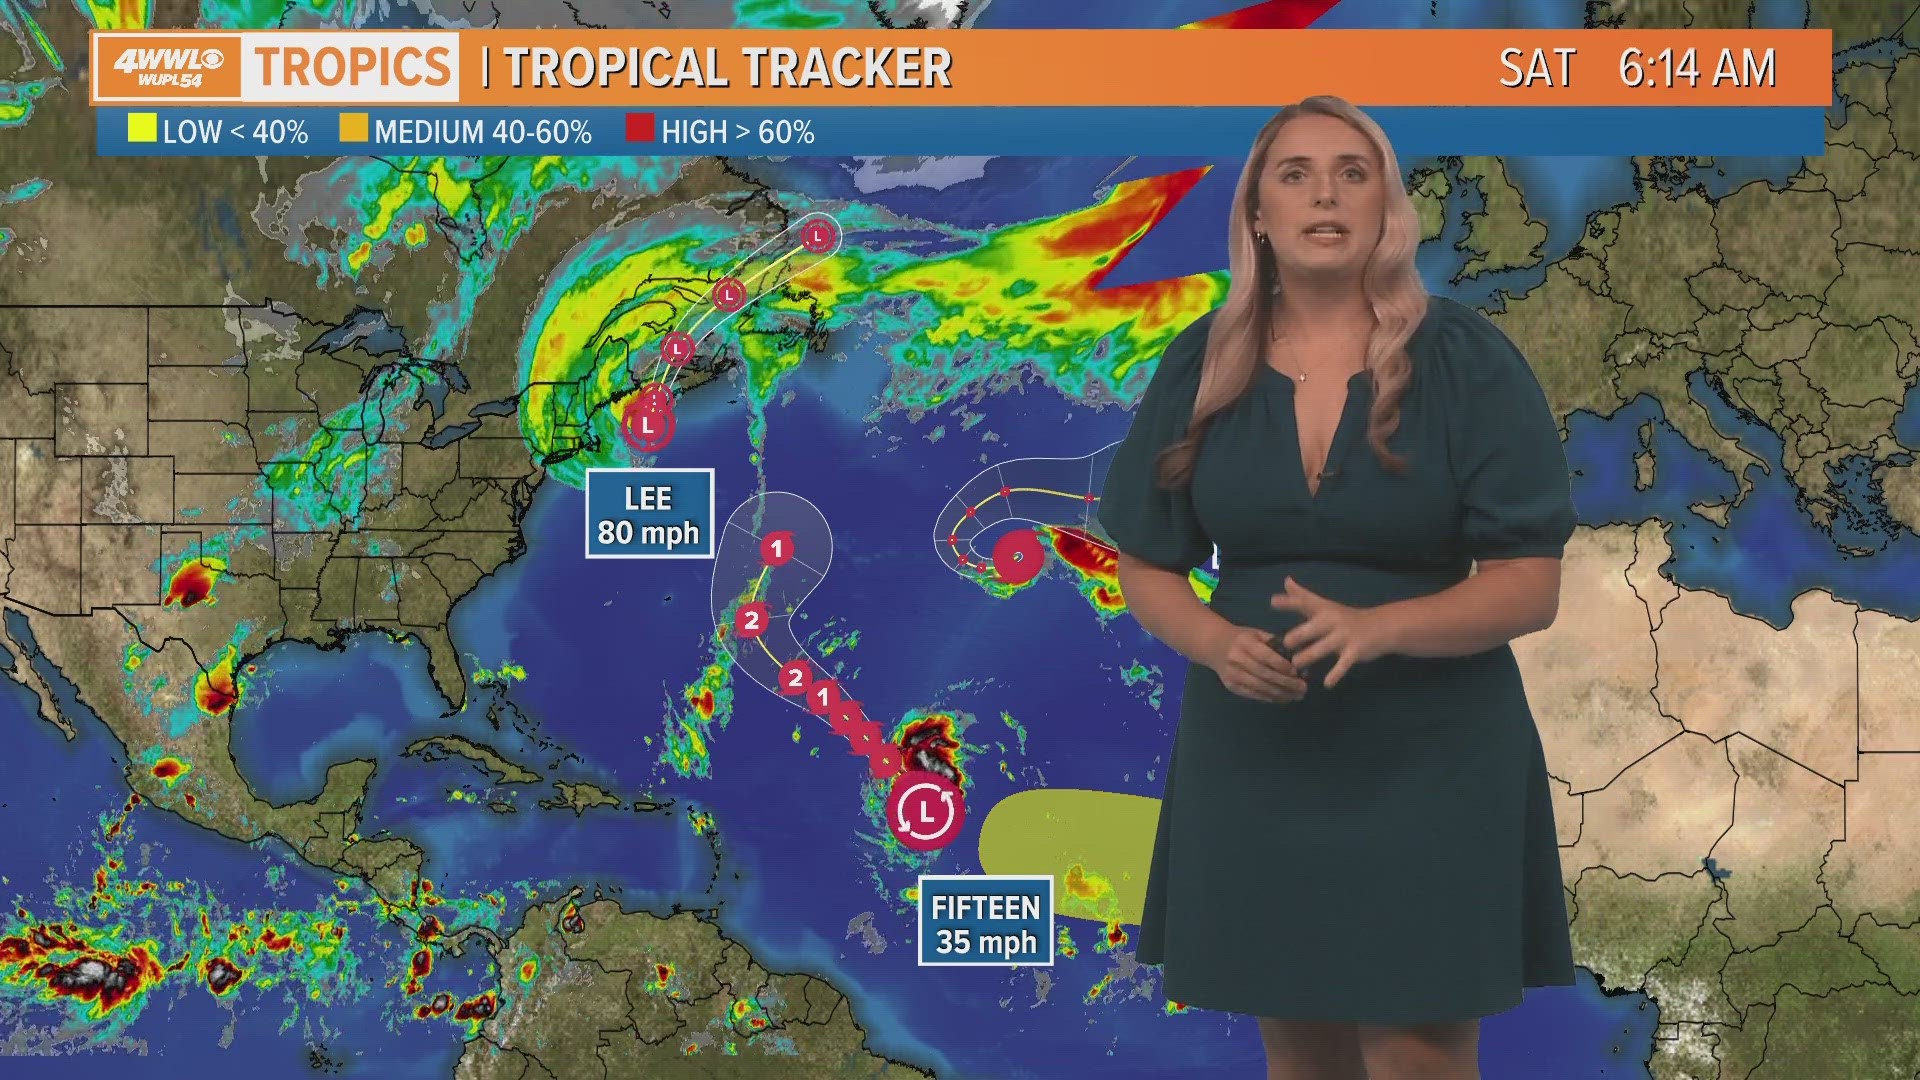 Meteorologist Alexa Trischler says Lee is a post-tropical cyclone sending impacts to New England and Canada, Tropical Depression 15 is in the open Atlantic.